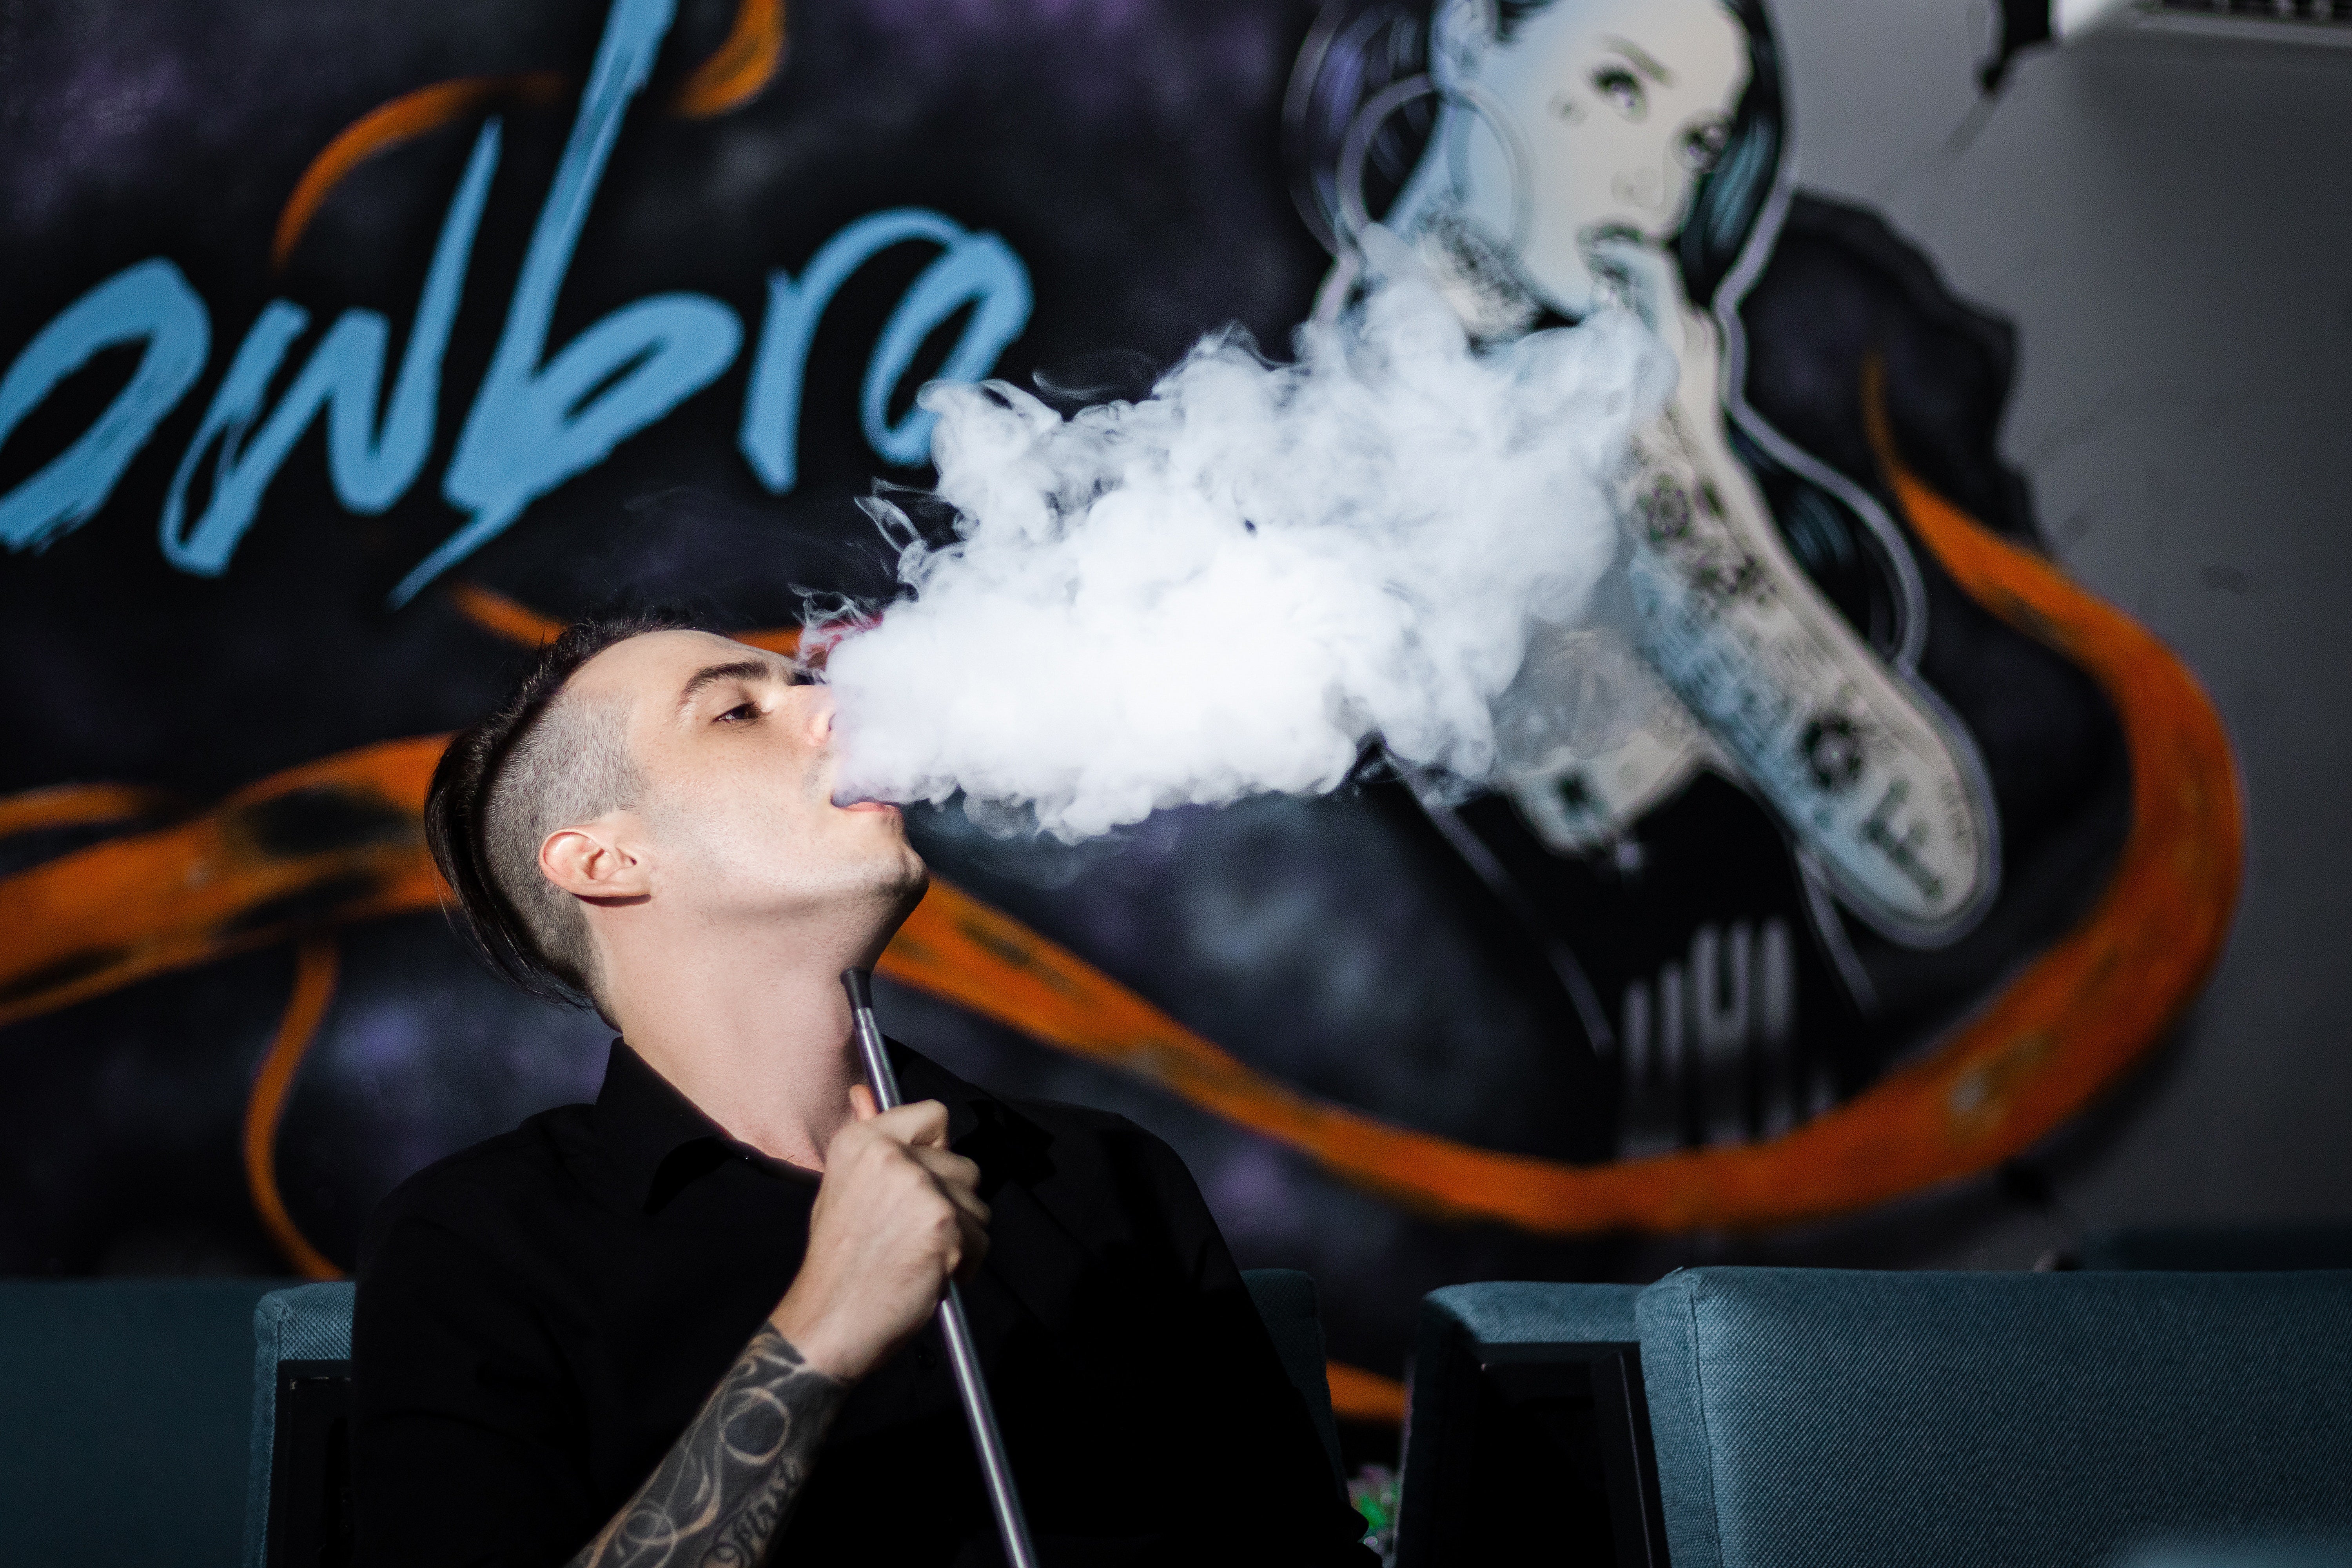 These Are the Reasons You Get a Burnt Taste from Vaping